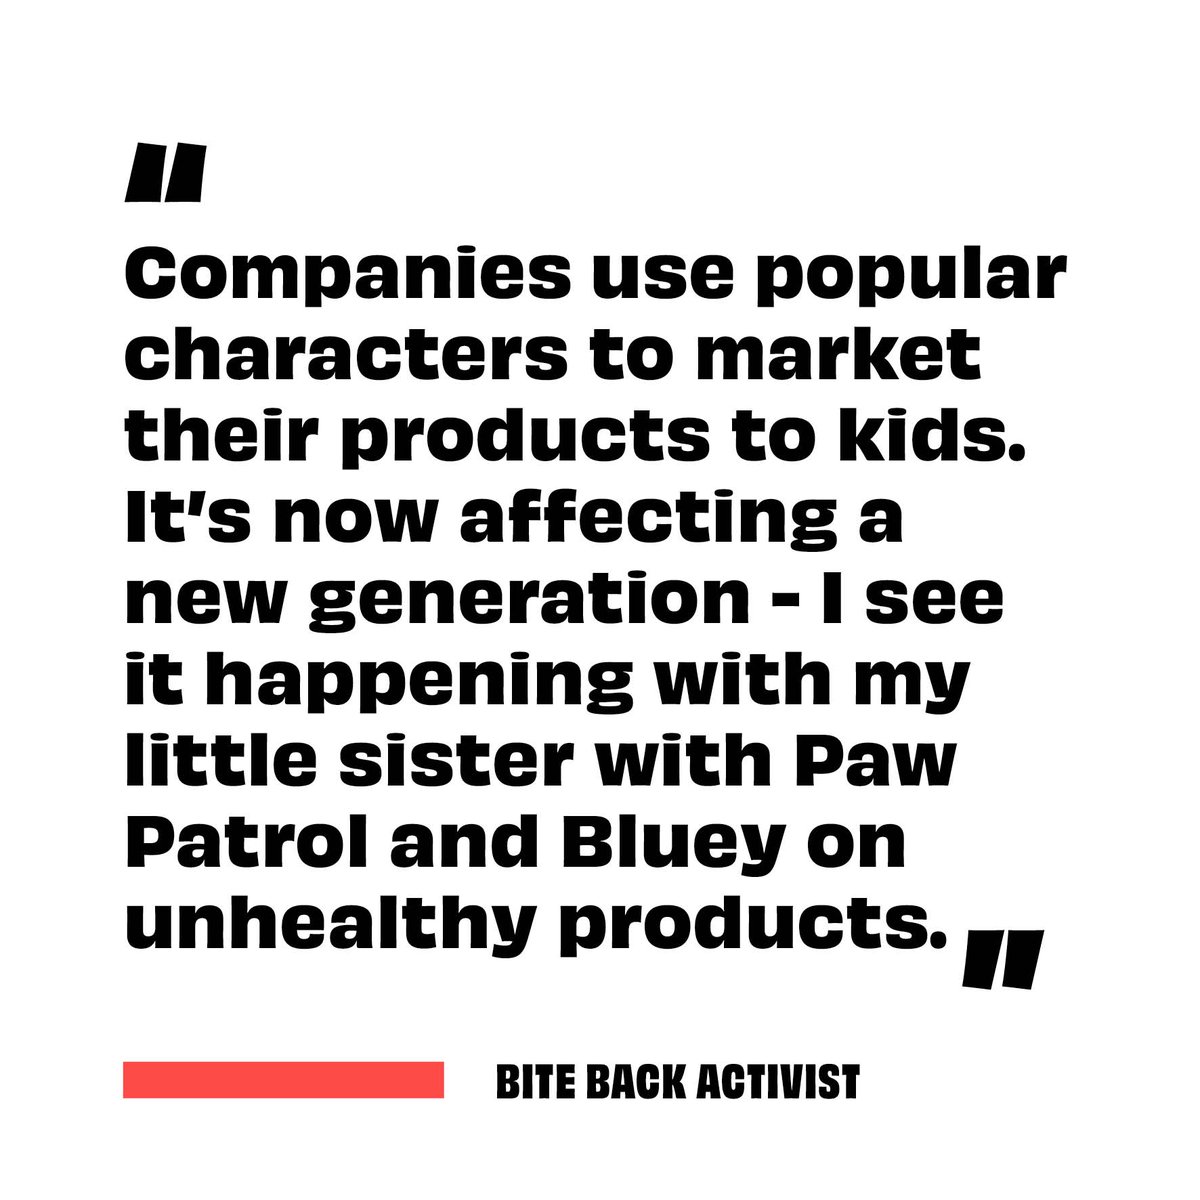 Our eyes are open to how the food system is rigged against our health — and we see it impacting our little brothers and sisters too.

Support our campaign by calling on the biggest food companies to end manipulative marketing tactics bb2030.co/svgC #FuelUsDontFoolUs